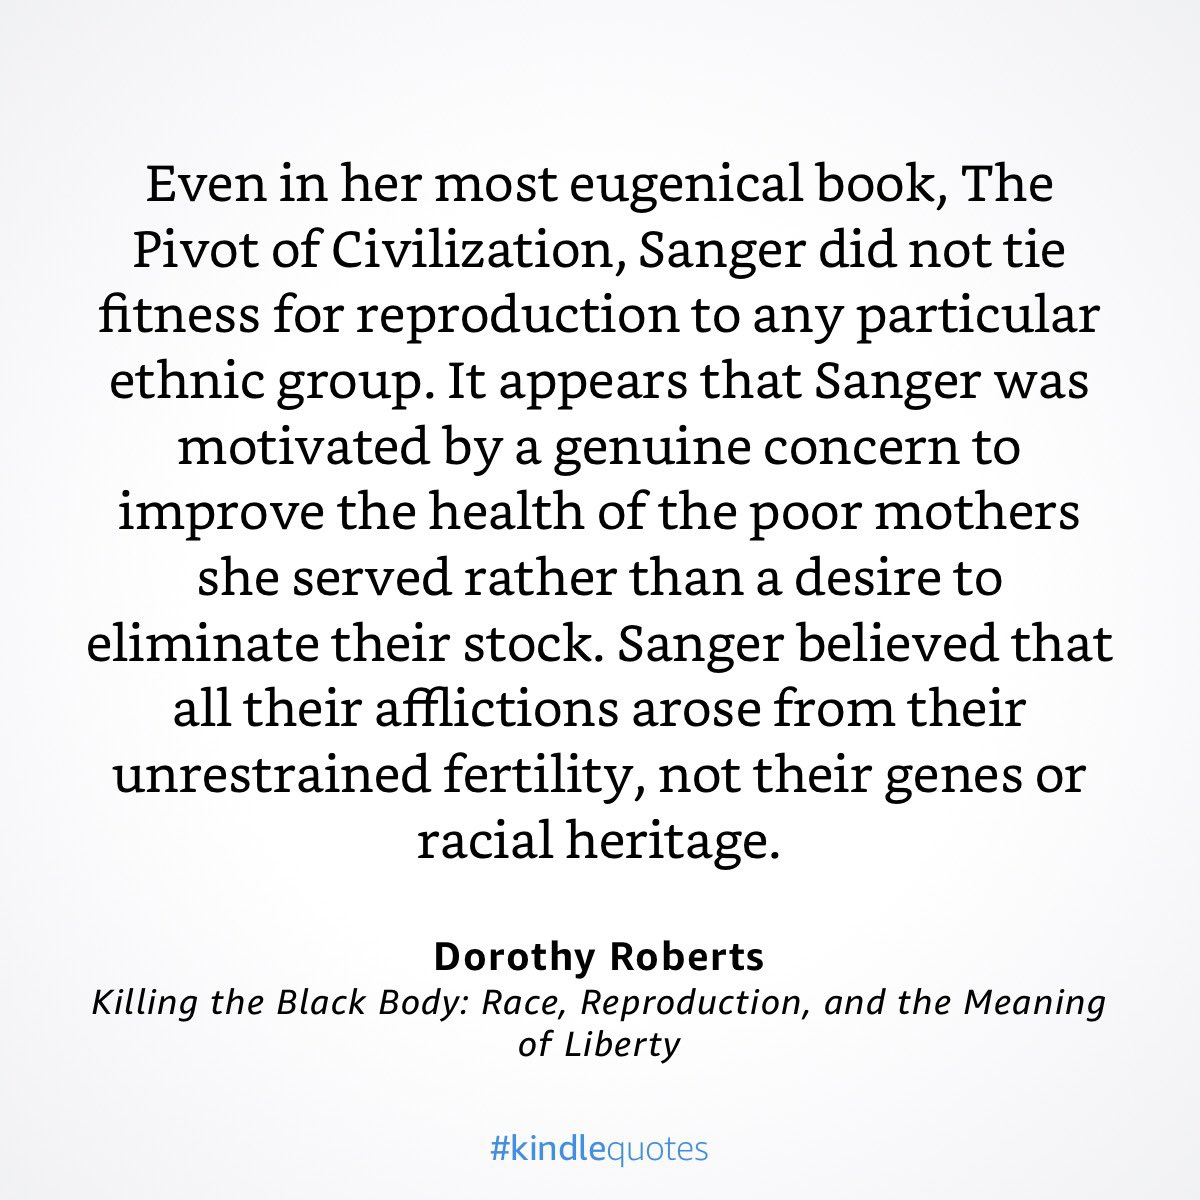 Antichoicers hyperfocus on her racist views—and yeah, she held some pretty racist views—but Margaret Sanger wasn’t trying to eradicate any particular ethnic group.She WAS trying to eradicate people with disabilities. Flat out.